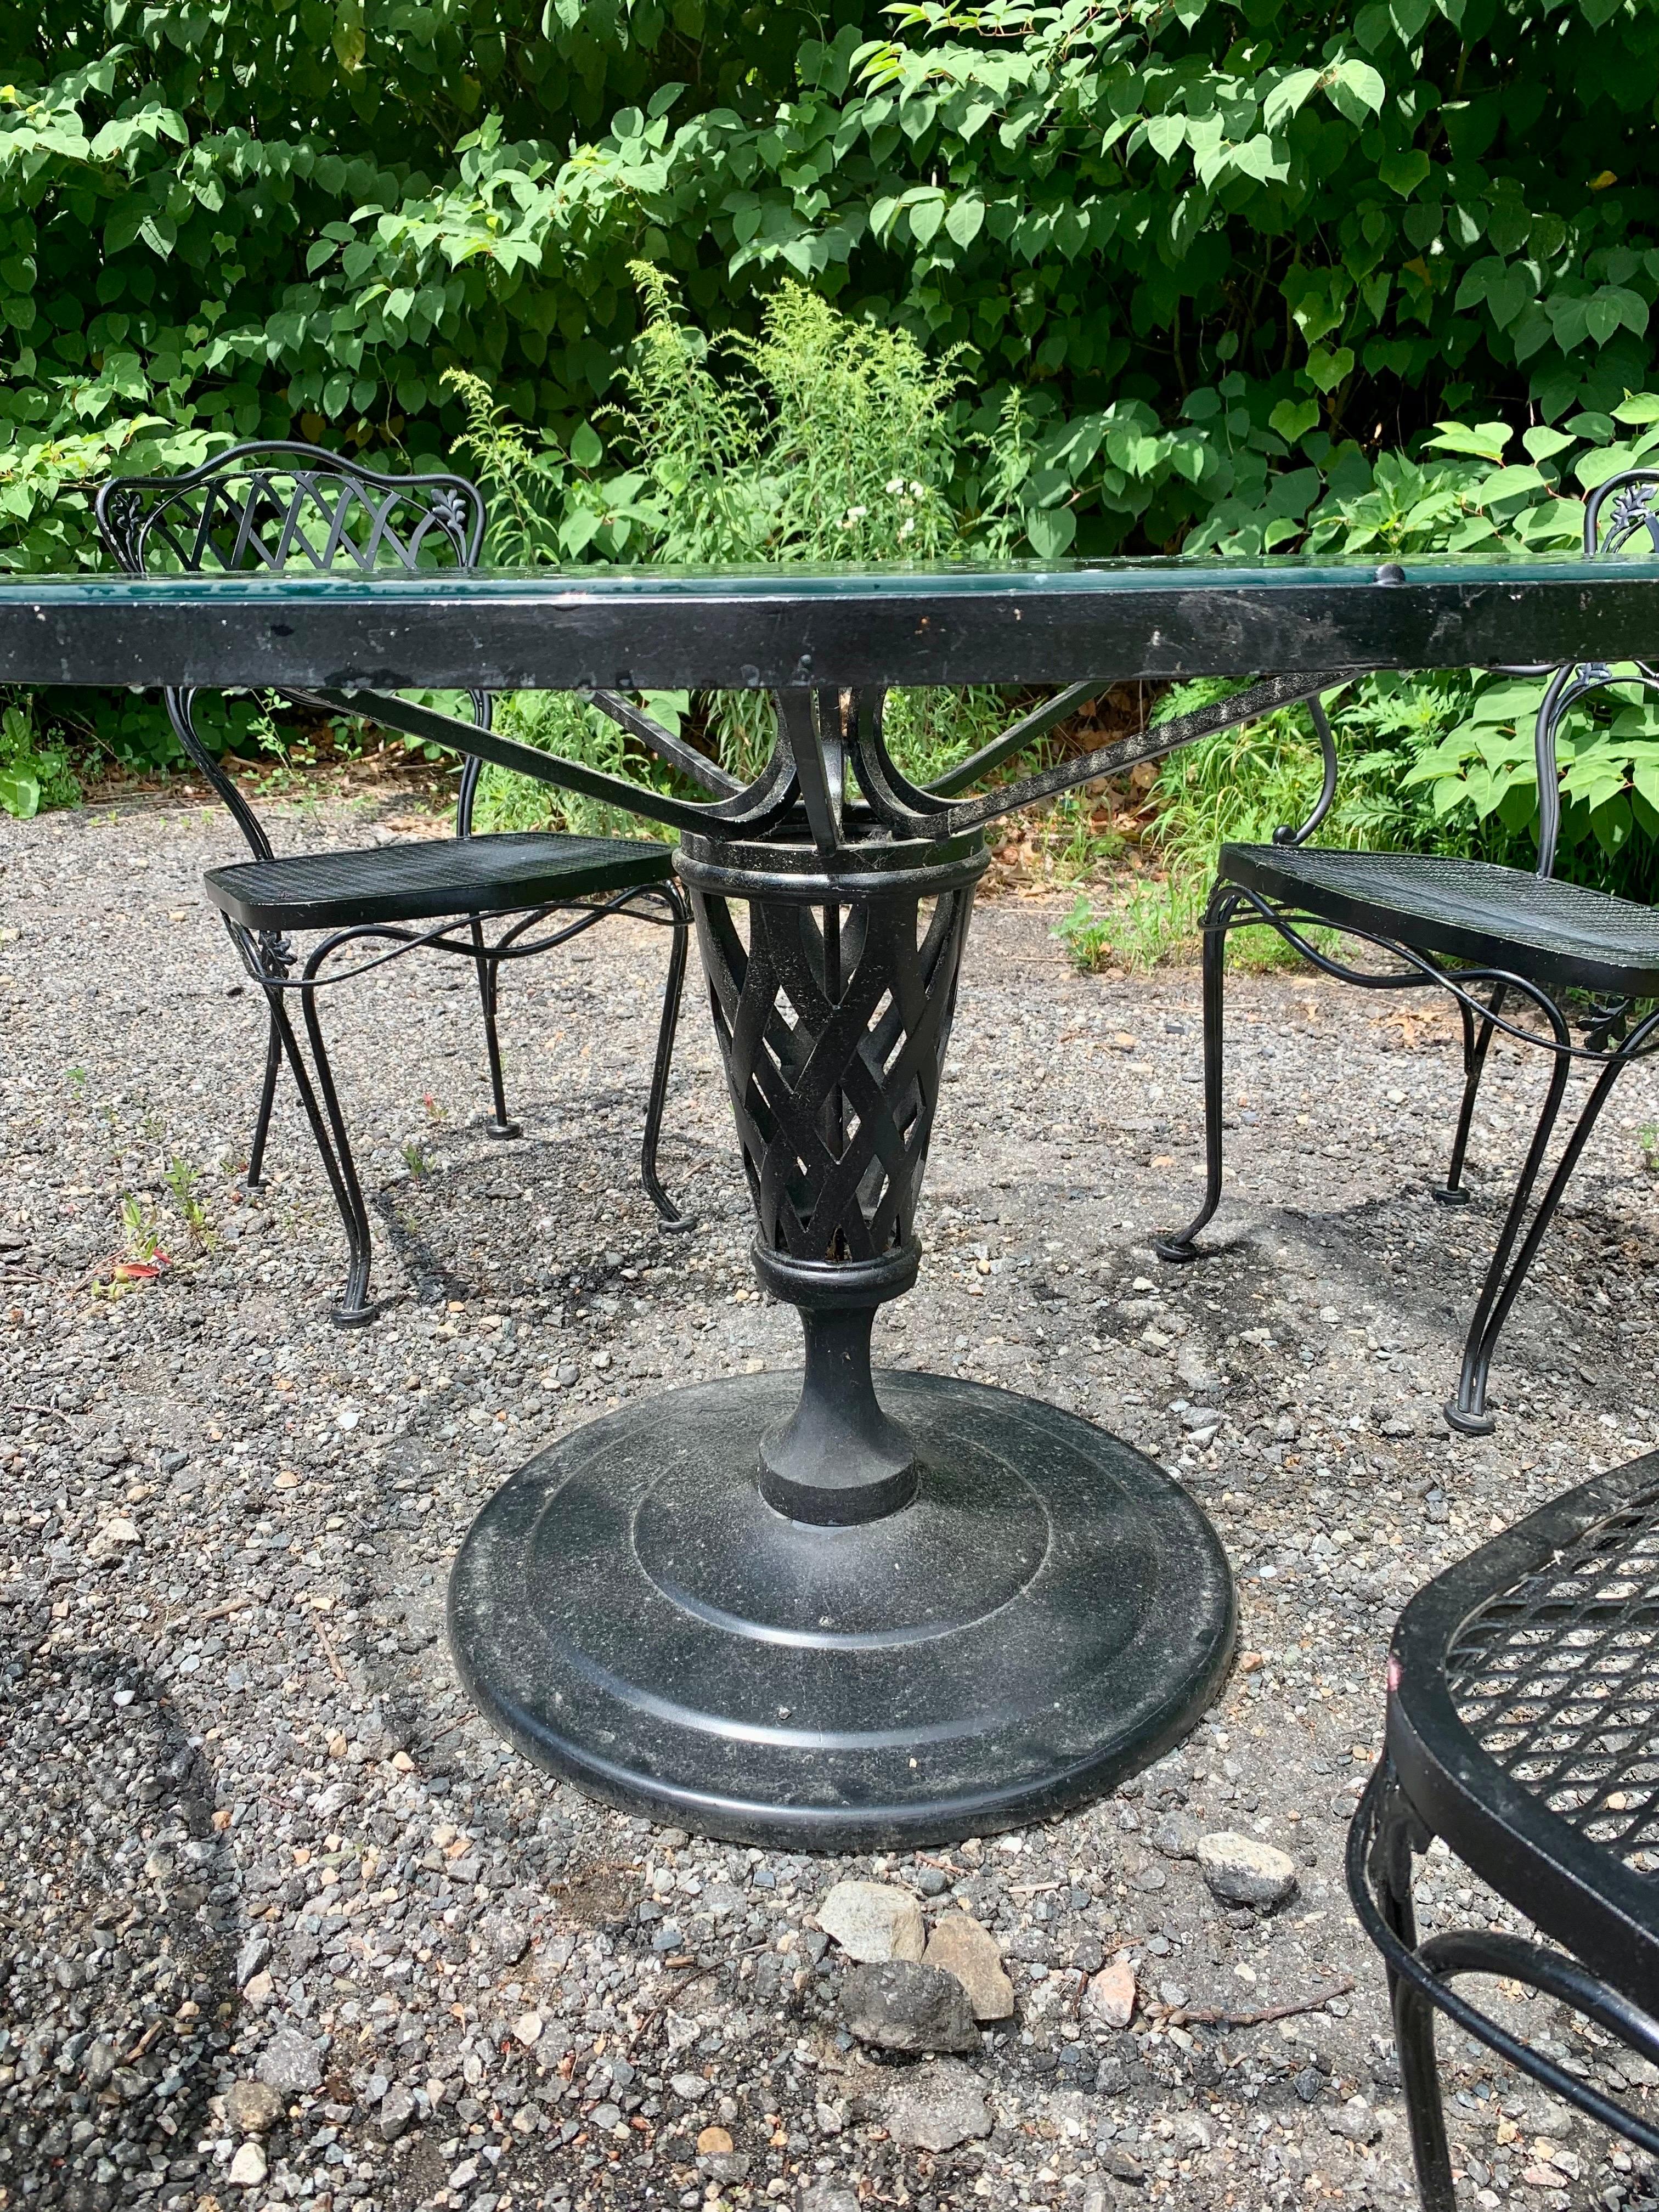 Vintage Woodard Wrought Iron Patio Dining Set 5 Piece in highly desirable and hard to find “Florentine” pattern.

Choose your own performance fabric and have our in-house upholster create new removable covers and new cushions using DryFast Marine